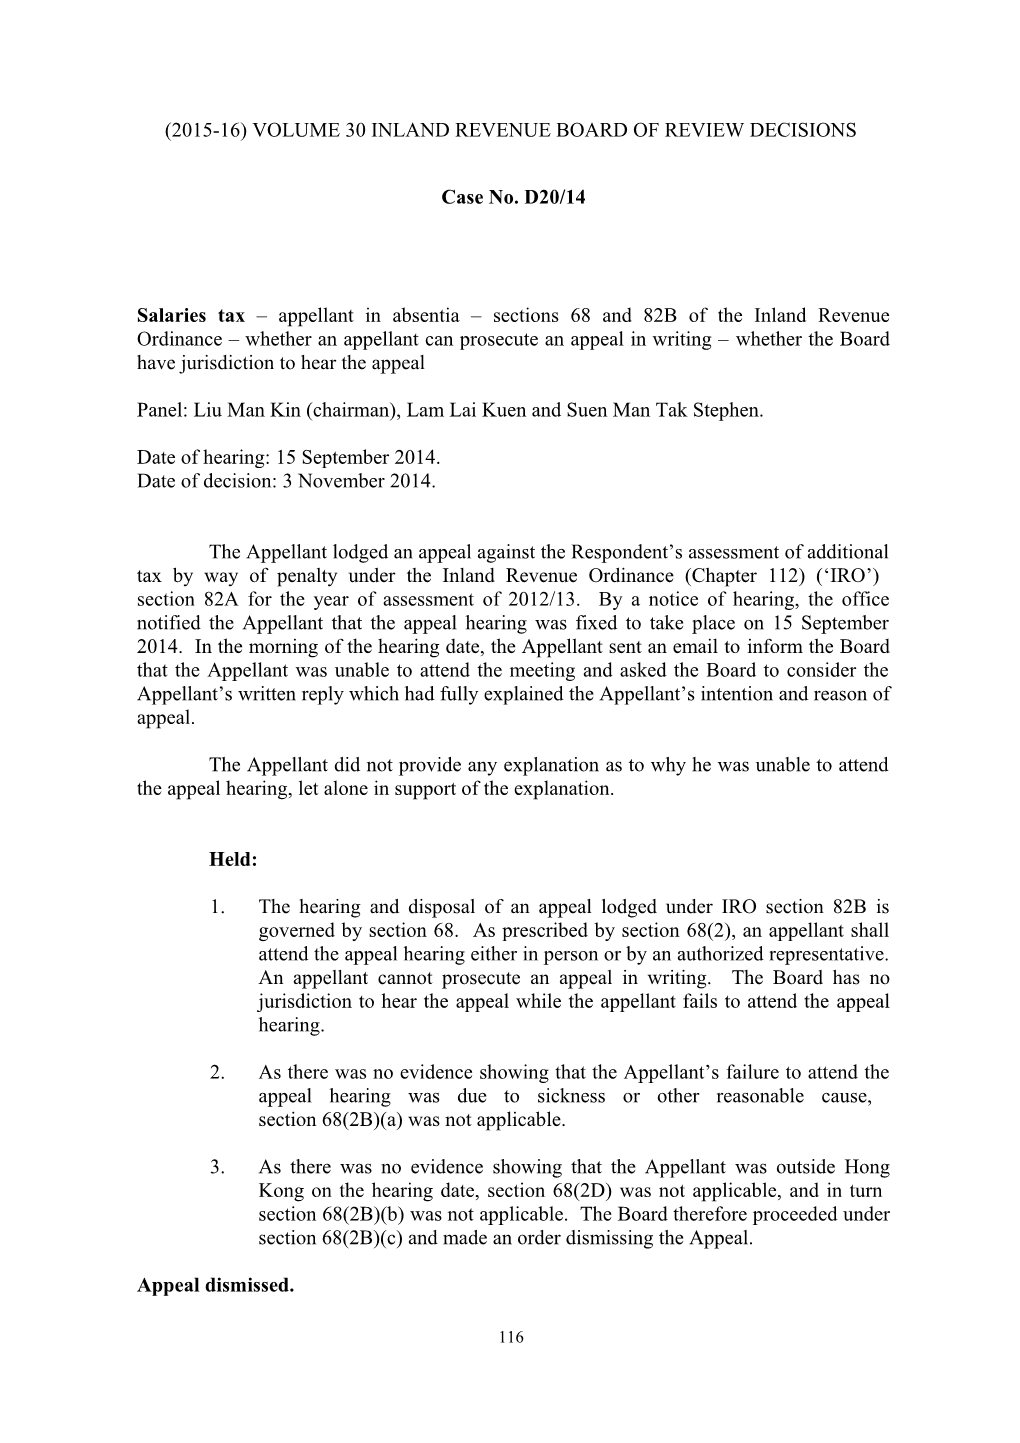 (2015-16) Volume 30 Inland Revenue Board of Review Decisions